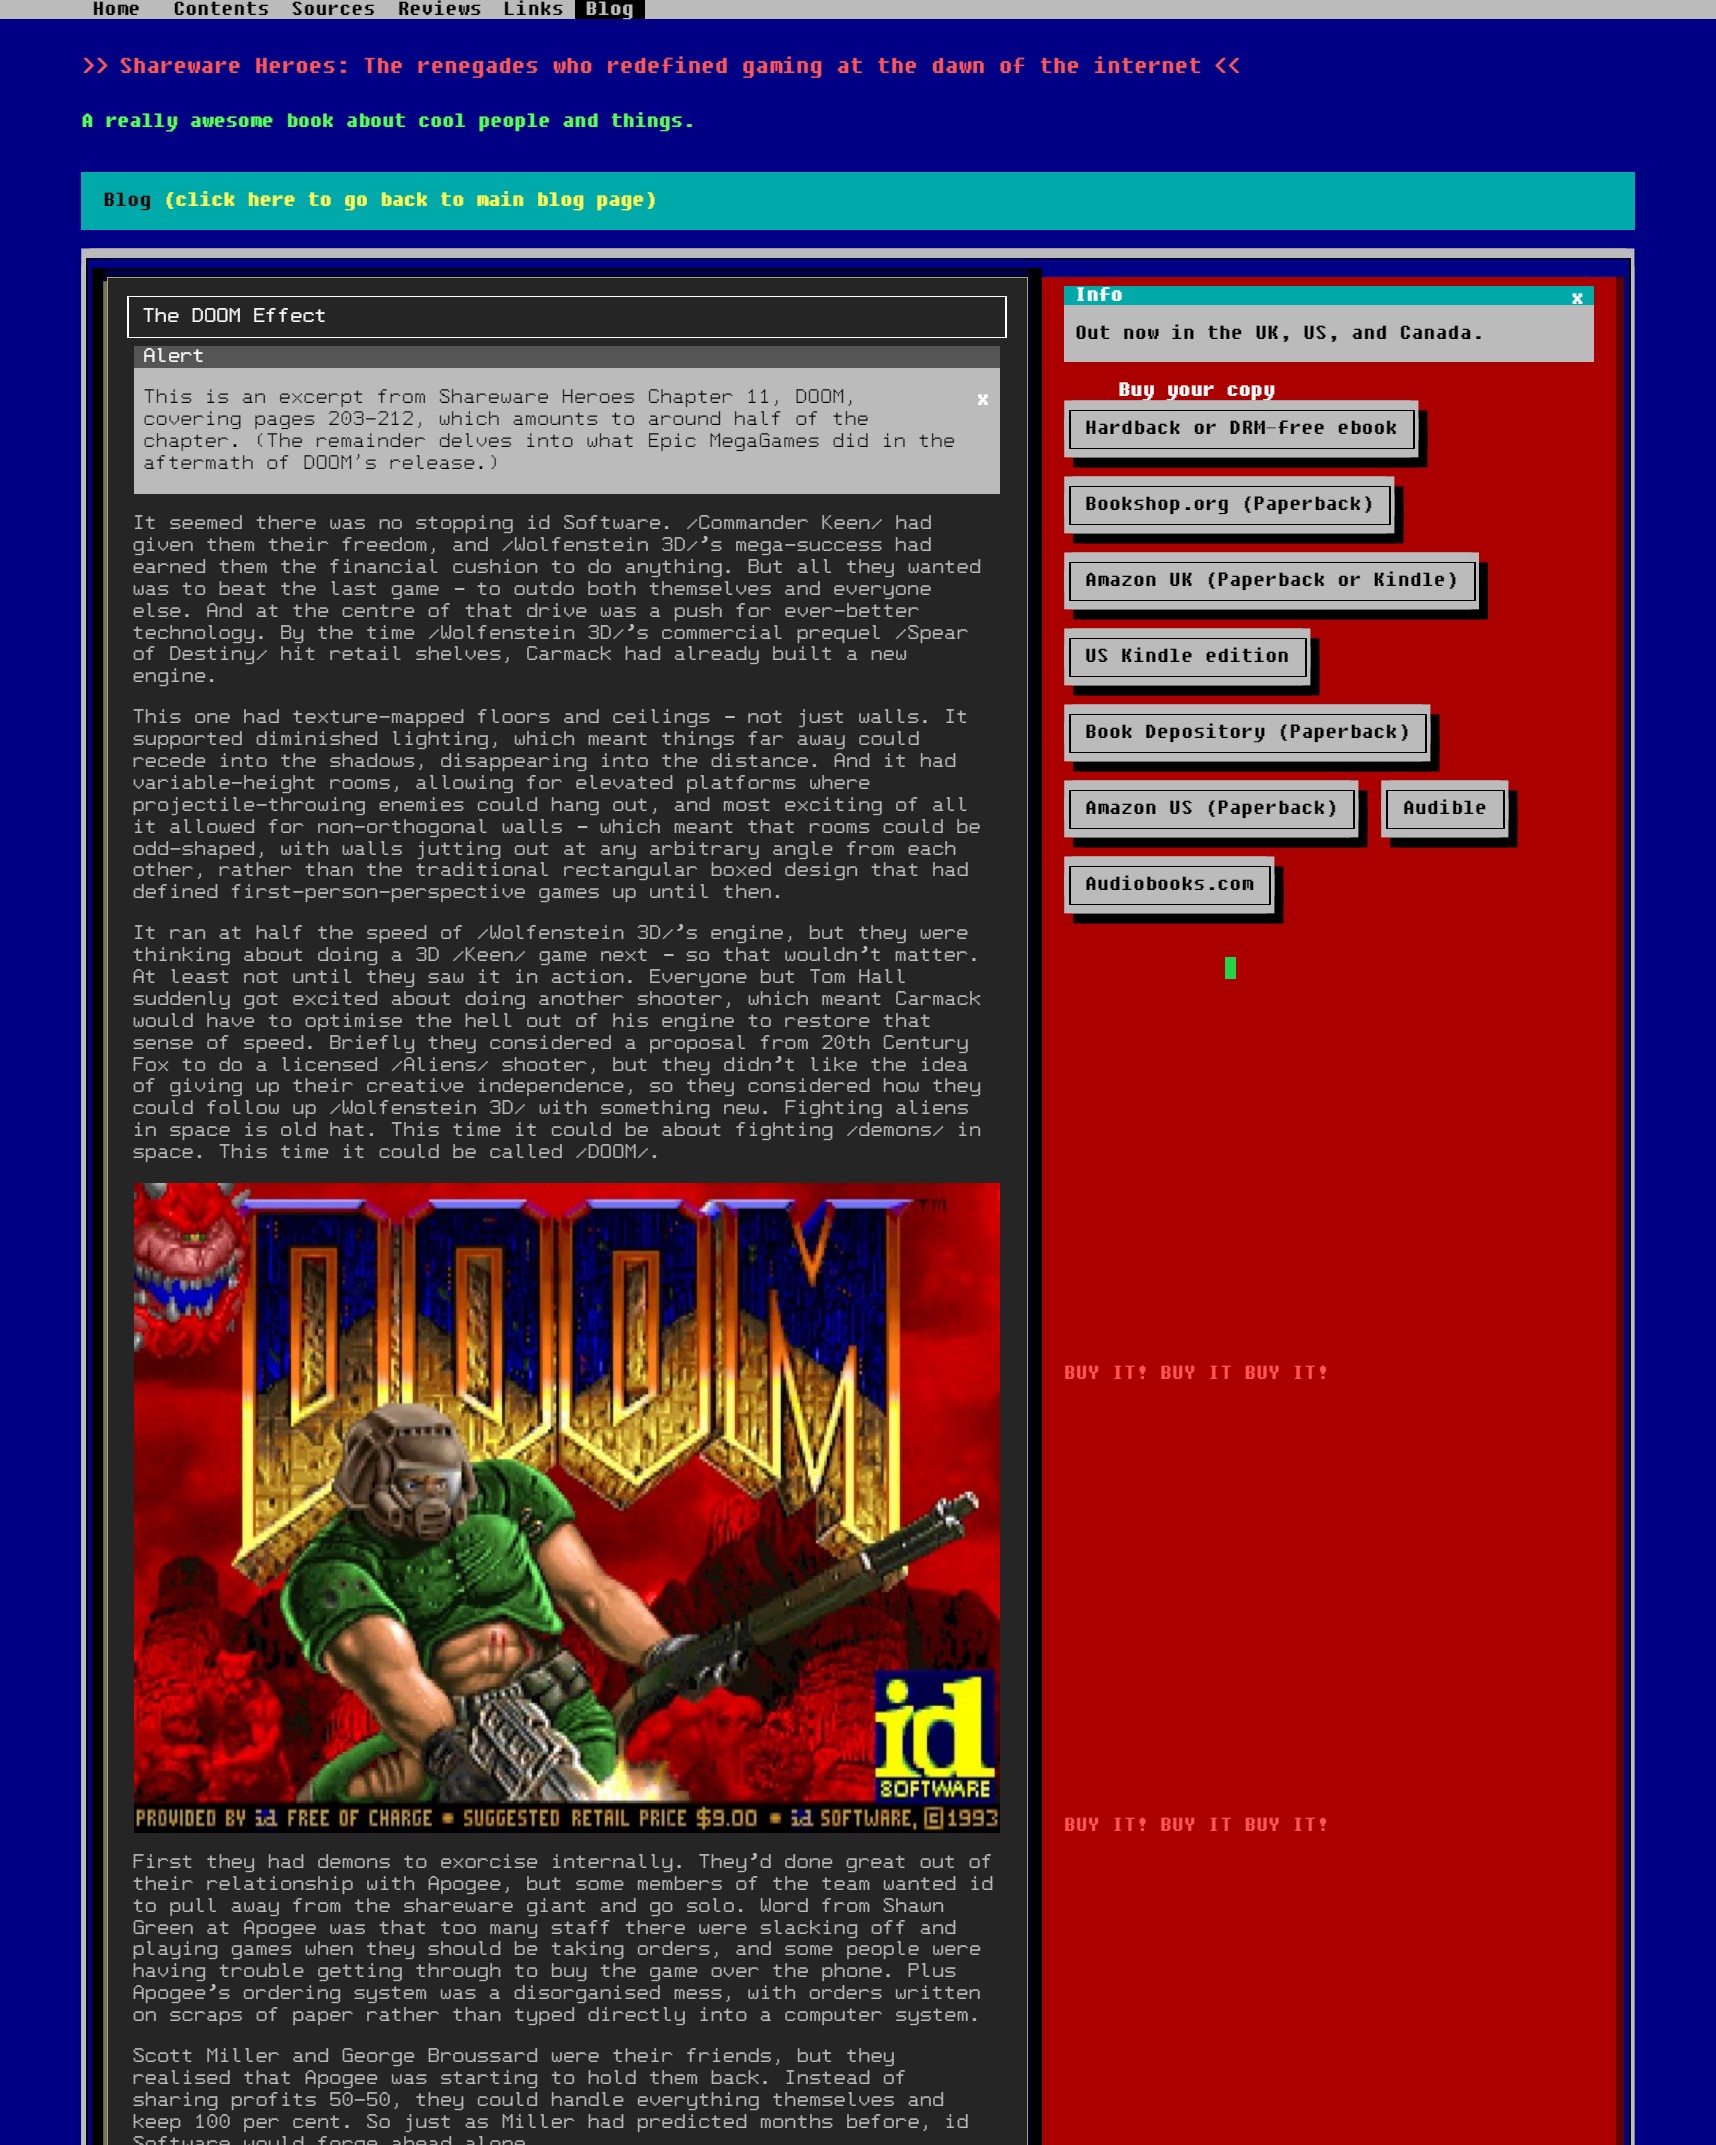 A screenshot showing part of the linked article, titled "The DOOM Effect", which begins "It seemed there was no stopping id Software. Commander Keen had given them their freedom, and Wolfenstein 3D’s mega-success had earned them the financial cushion to do anything. But all they wanted was to beat the last game – to outdo both themselves and everyone else. And at the centre of that drive was a push for ever-better technology. By the time Wolfenstein 3D’s commercial prequel Spear of Destiny hit retail shelves, Carmack had already built a new engine."